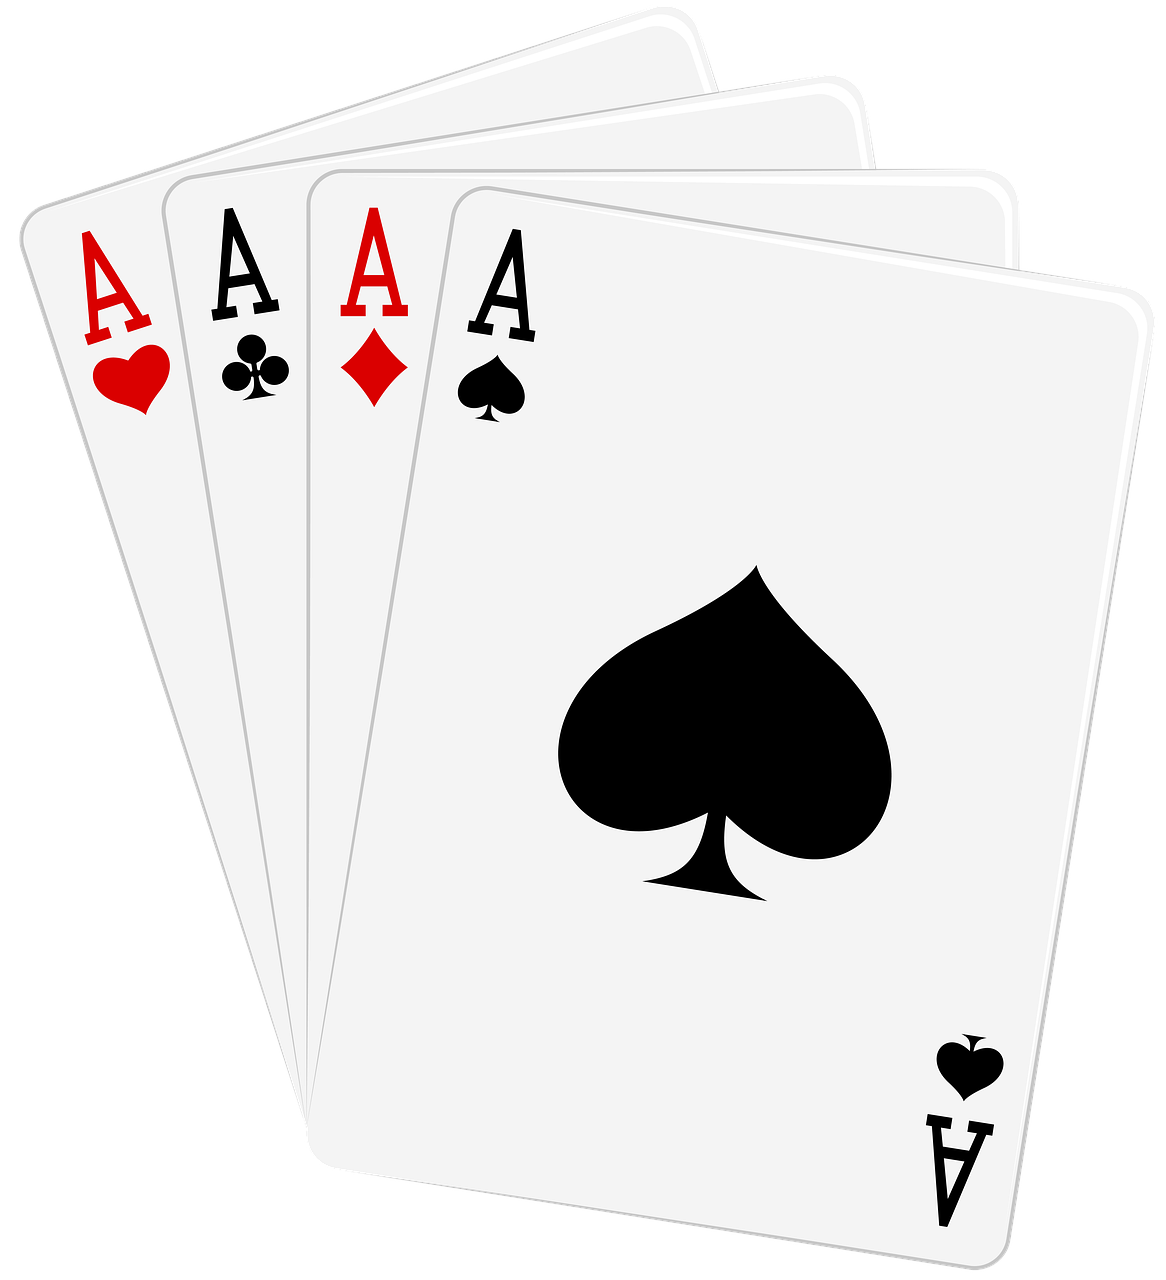 aces, playing cards, cards-7559882.jpg